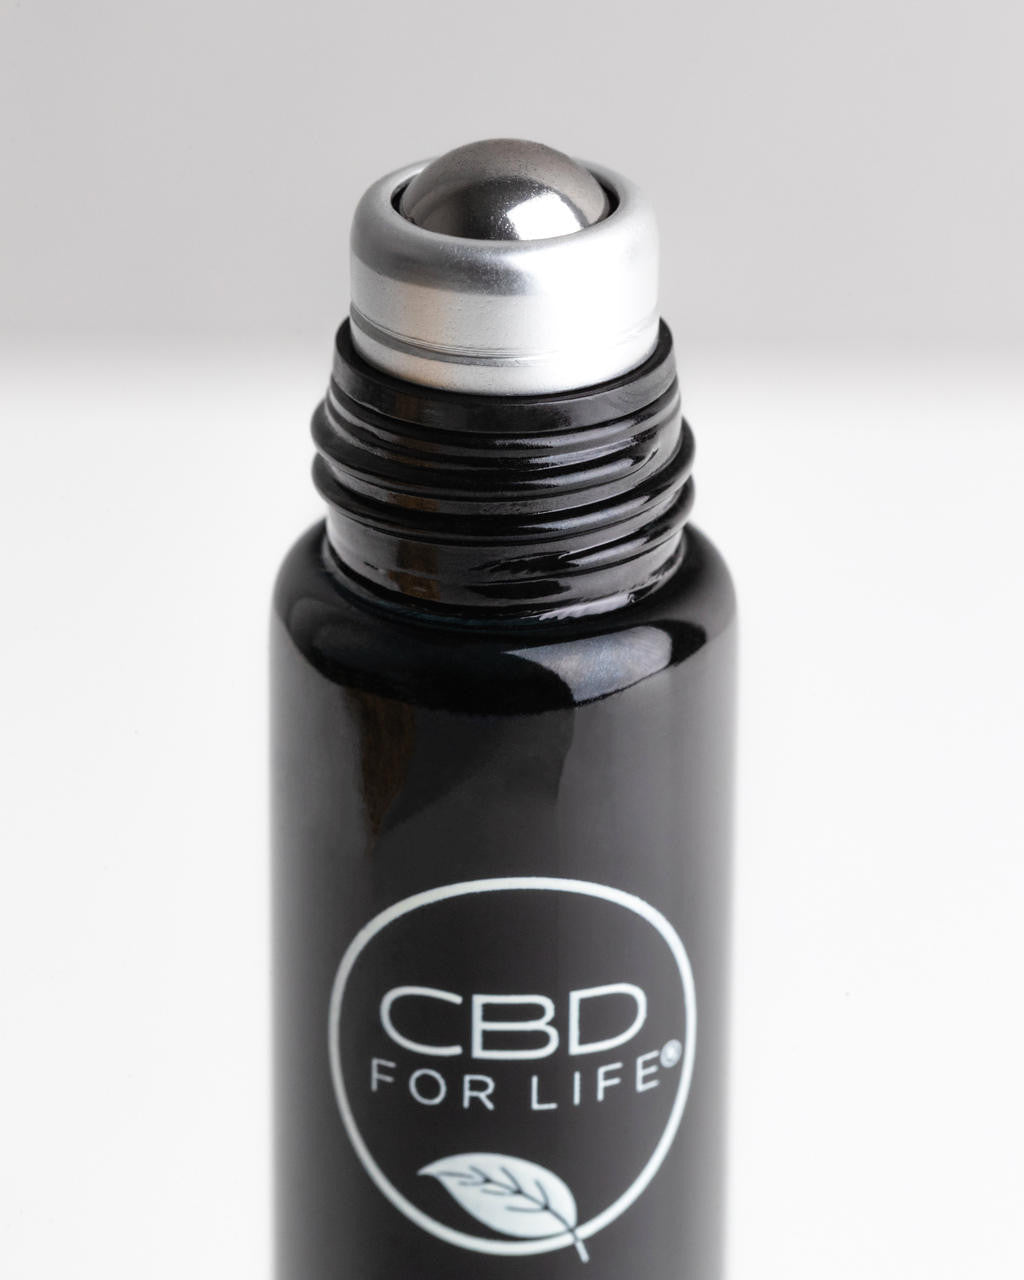 Our CBD roll-on oils are ideal for targeting areas of discomfort, pain, or soreness. You can buy CBD roll-on oils from our website and get them delivered to your door.